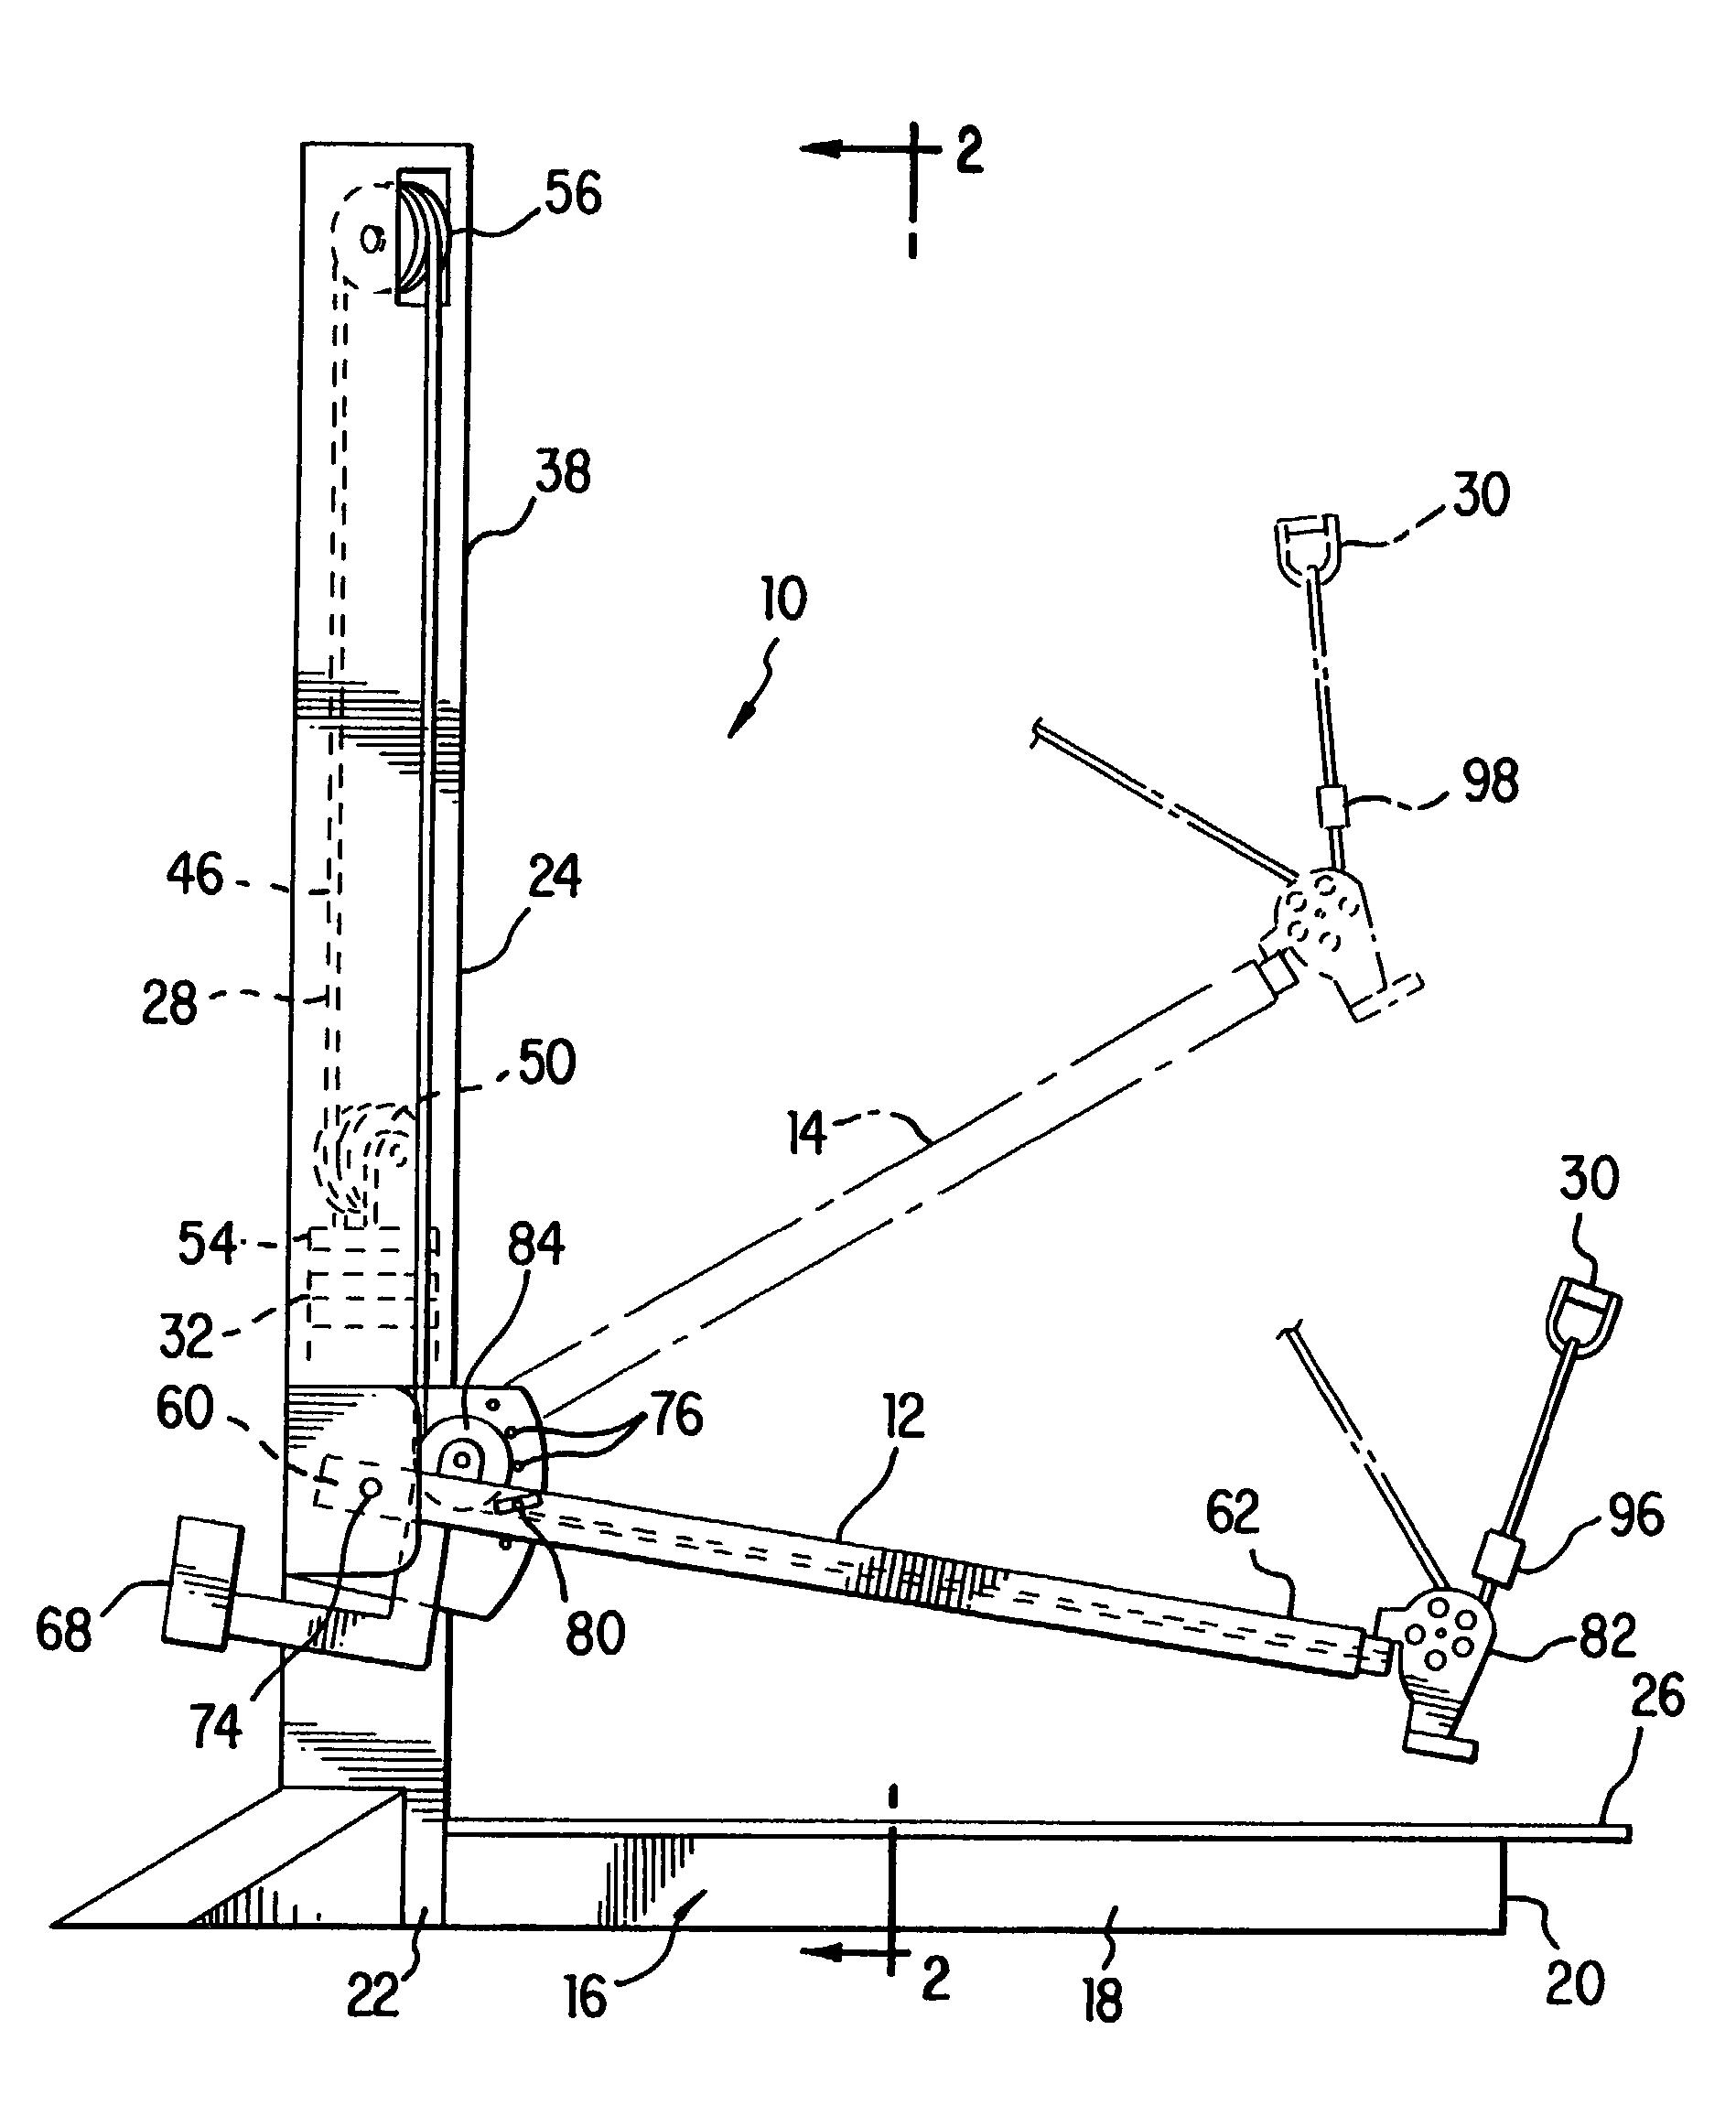 Cable crossover exercise apparatus